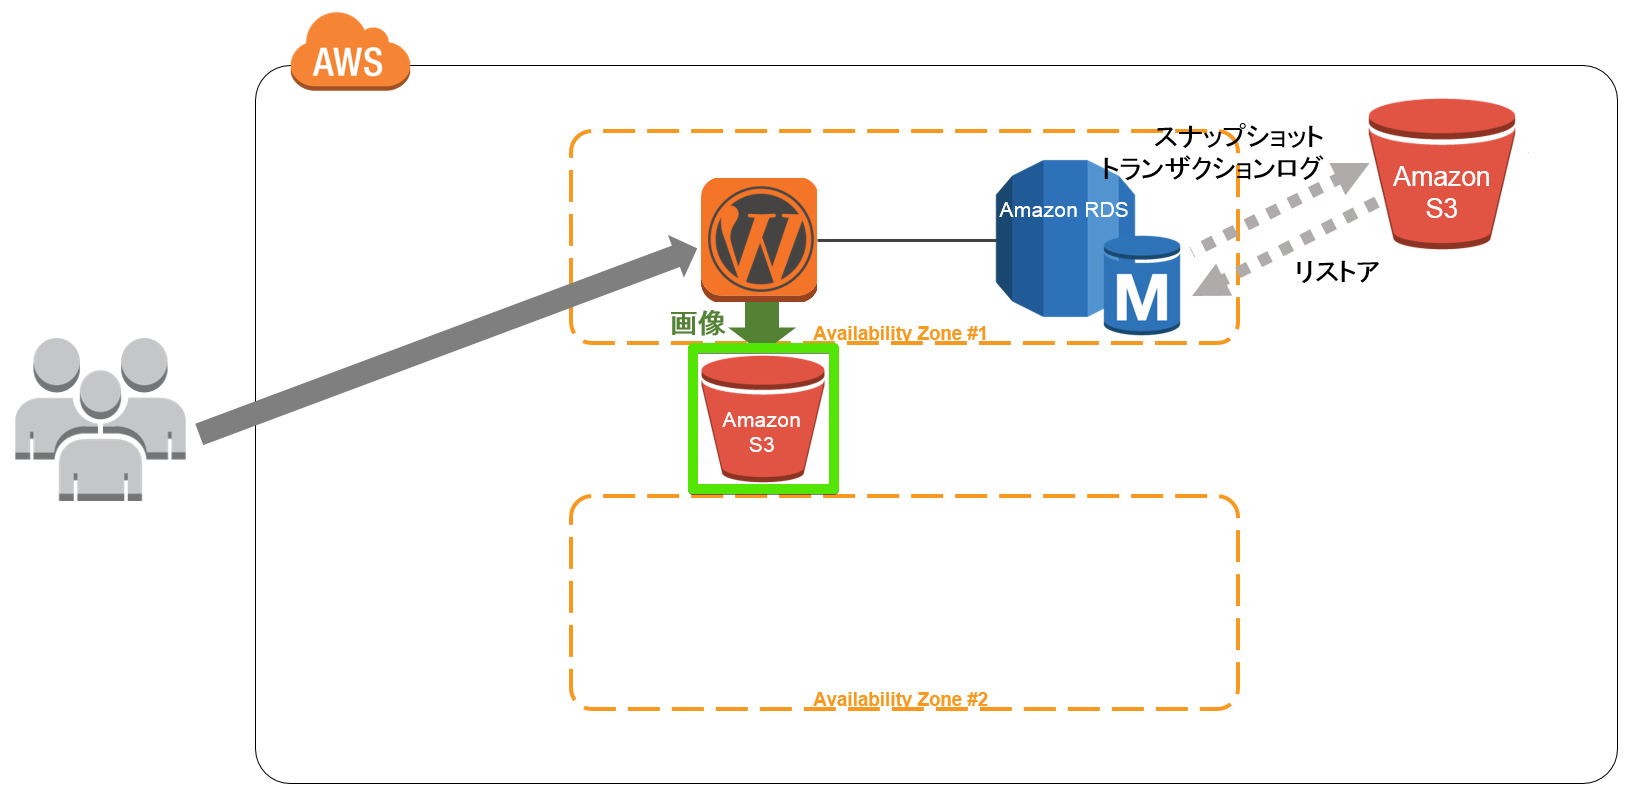 EC2-RDSアーキ図 - PowerPoint 2016-05-30 18.02.18.png